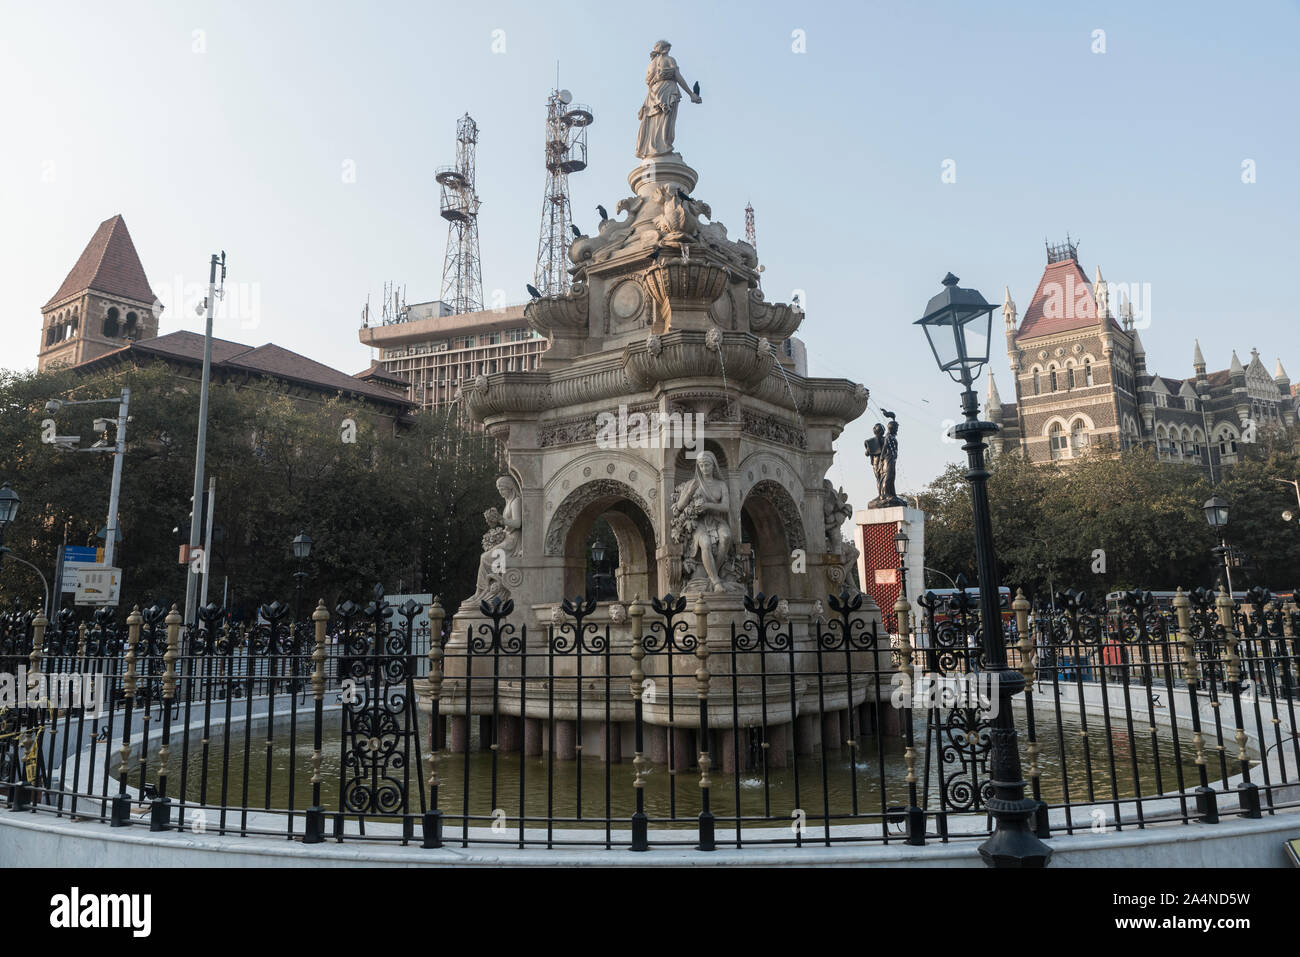 The British-era Flora fountain in fort area in Mumbai, India. It is an ornamentally and exquisitely sculpted architectural heritage monument located at the southern end of the historic Dadabhai Naoroji Road, (earlier called the Mile Long Road). It was built in CE 1864, and depicts the Roman goddess Flora. It was built at a total cost of Rs. 47,000, or 9000 pounds sterling. It was refurbished by Indian National Trust for Art and Culture Heritage (INTACH) and inaugurated in CE 2019 January, with restoration of the sculpture and water fountains, at a cost of Rs. 4.25 Crore. Stock Photo